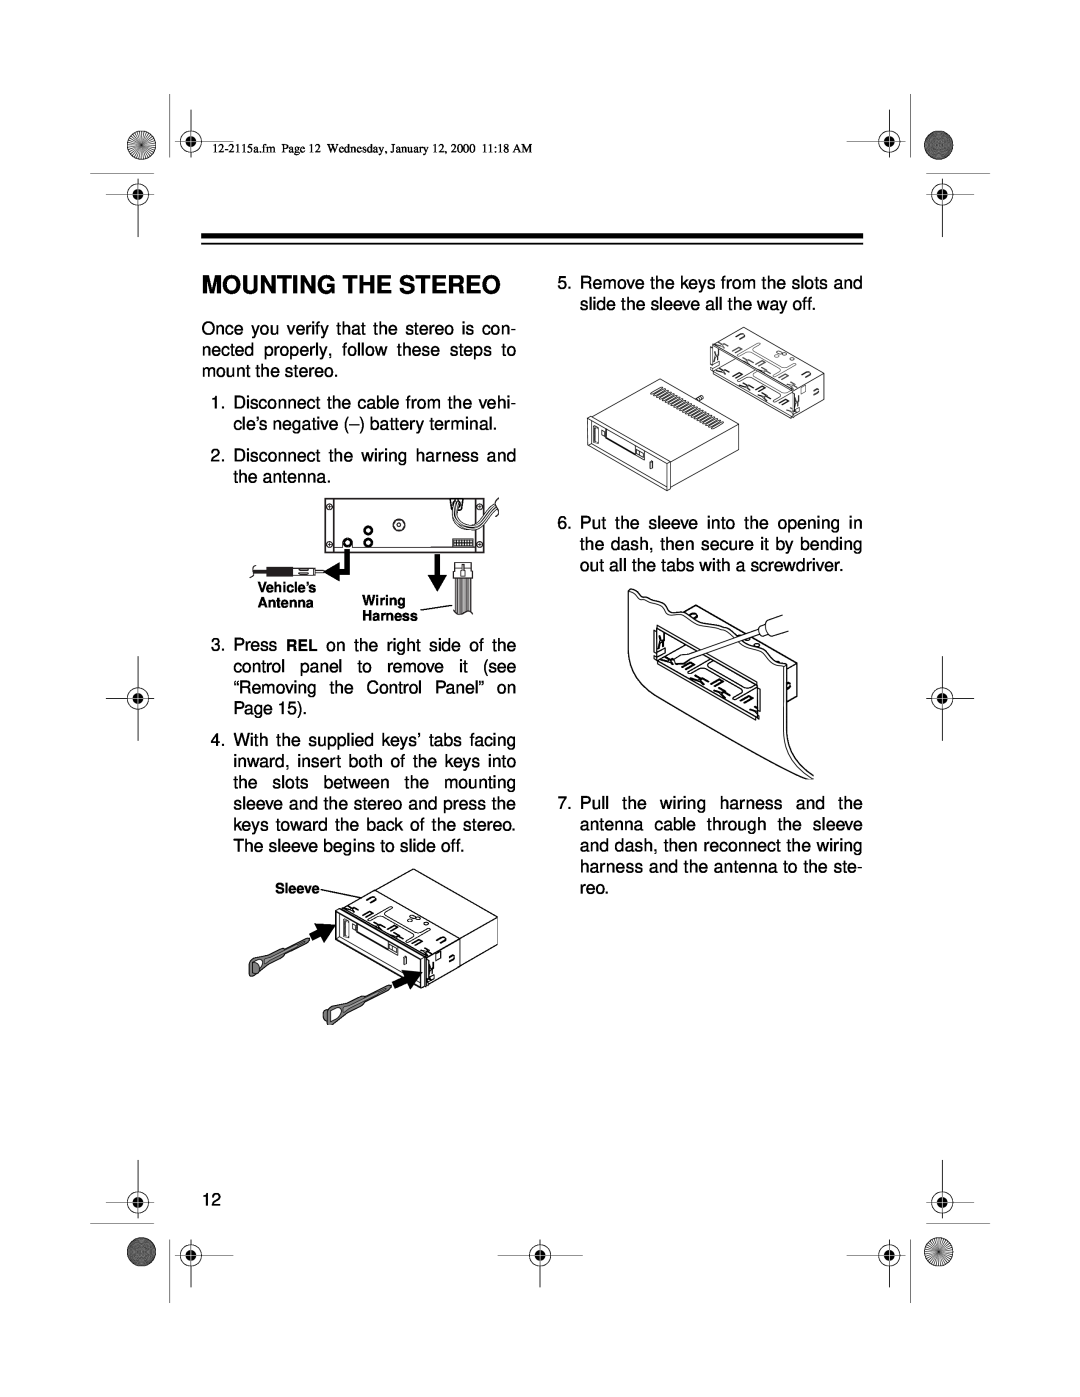 Radio Shack AM/FM Stereo Cassette owner manual Mounting The Stereo 